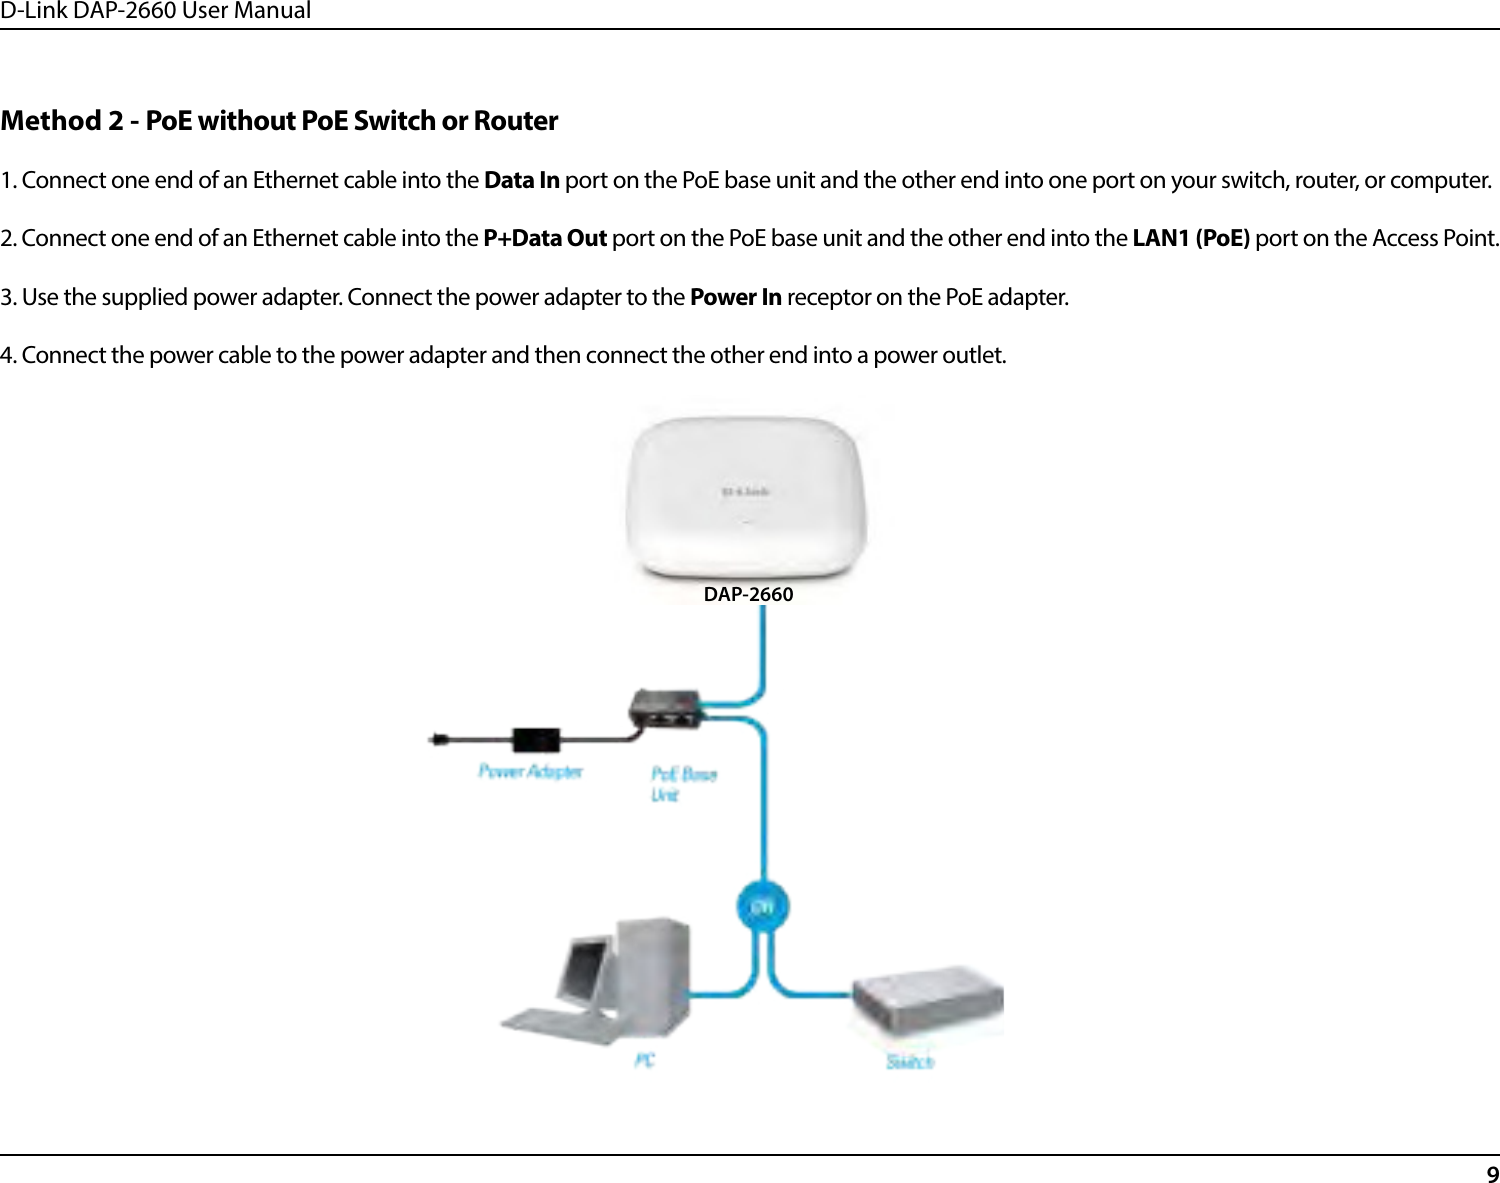 D-Link DAP-2660 User Manual9Method 2 - PoE without PoE Switch or Router1. Connect one end of an Ethernet cable into the Data In port on the PoE base unit and the other end into one port on your switch, router, or computer. 2. Connect one end of an Ethernet cable into the P+Data Out port on the PoE base unit and the other end into the LAN1 (PoE) port on the Access Point. 3. Use the supplied power adapter. Connect the power adapter to the Power In receptor on the PoE adapter.4. Connect the power cable to the power adapter and then connect the other end into a power outlet.DAP-2660